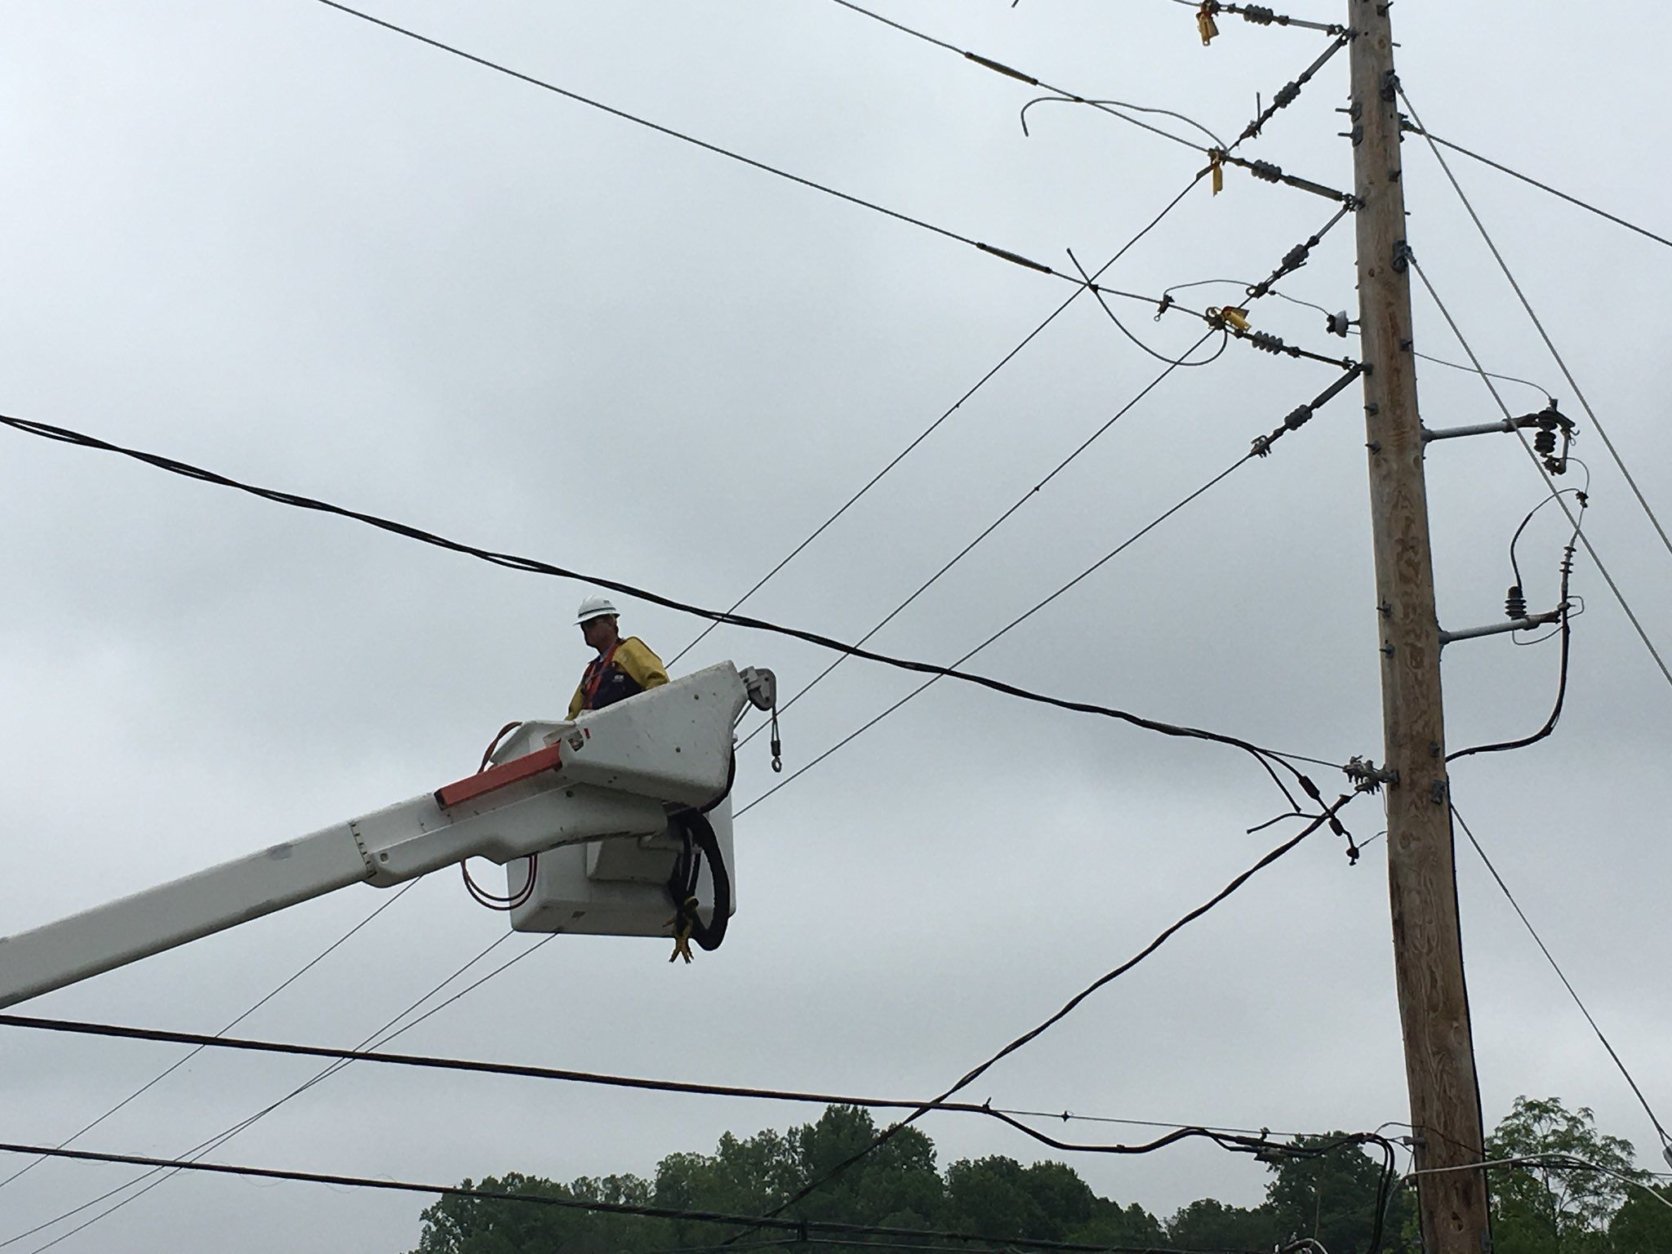 Utility crews are also hard at work stabilizing light posts and fixing wires. (WTOP/Mike Murillo)